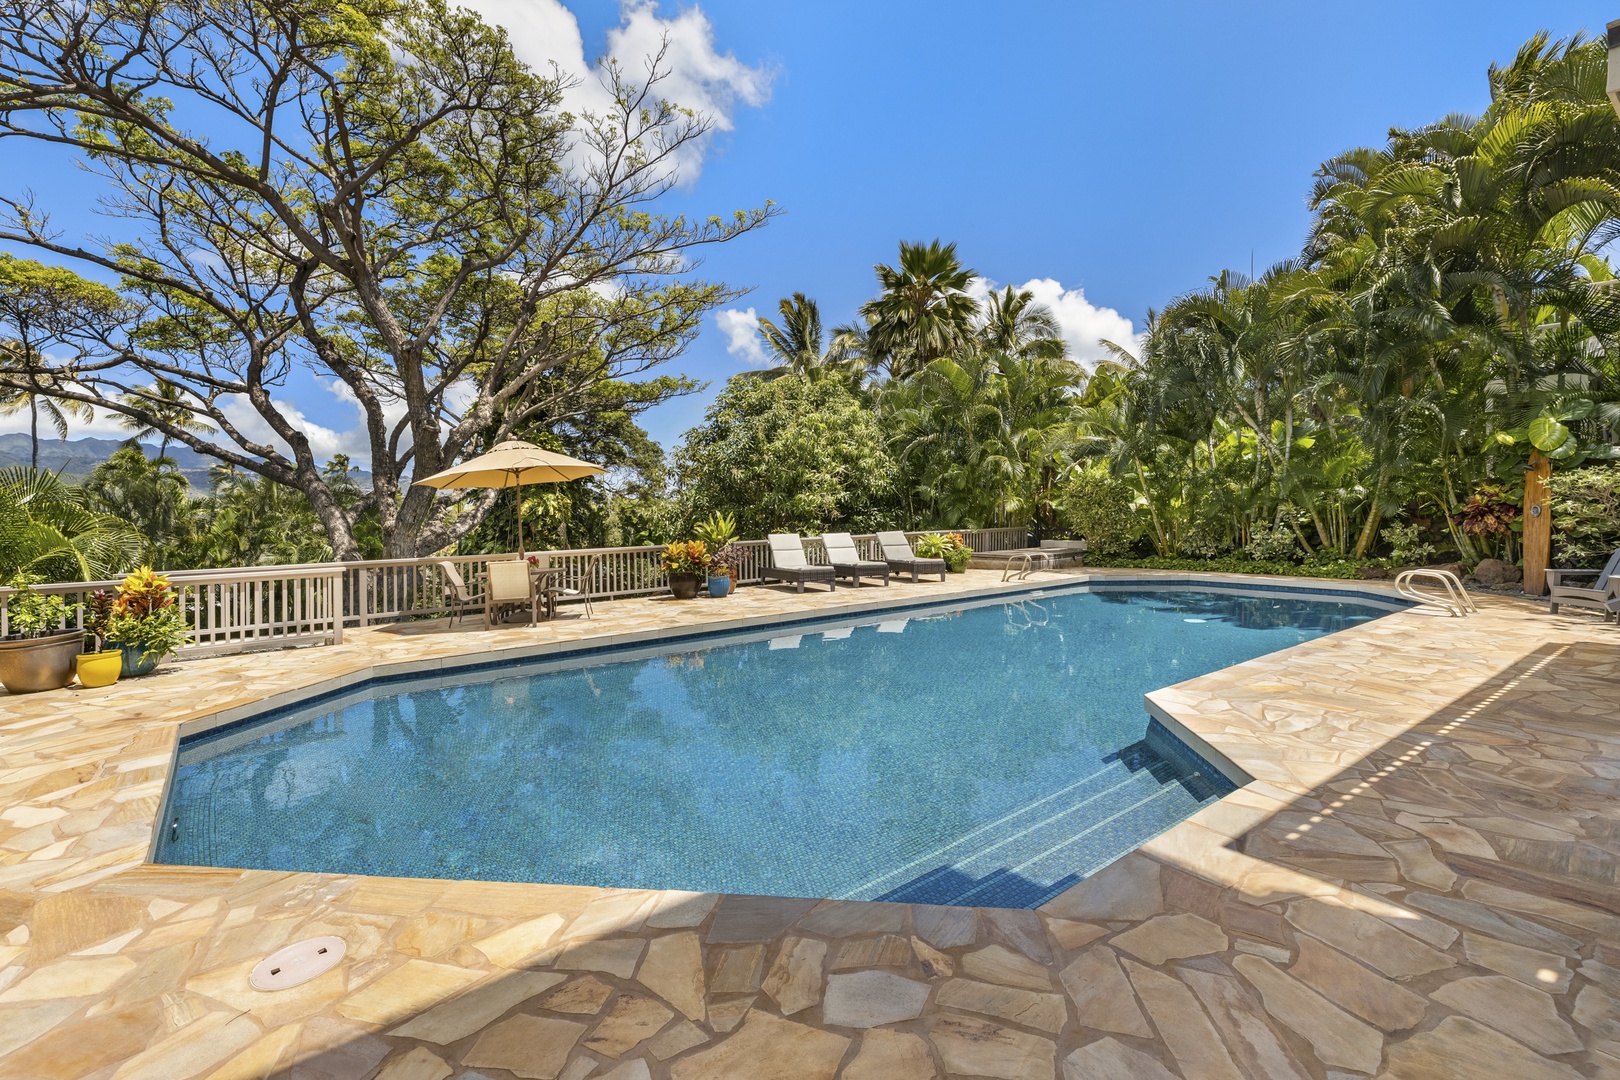 Honolulu Vacation Rentals, Hale Le'ahi* - This large private pool is fun for all